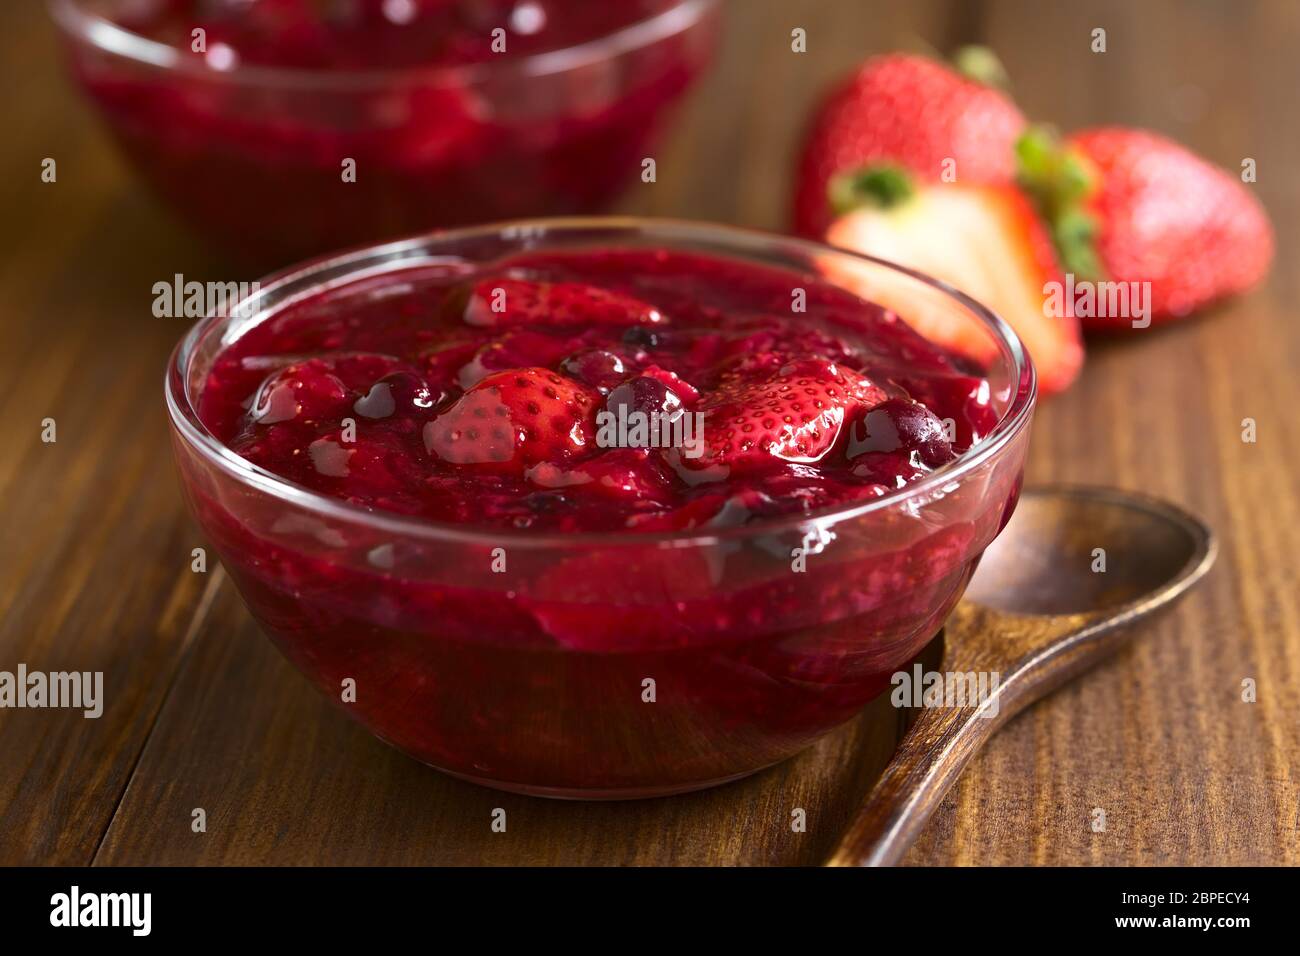 German Rote Gruetze (red groats) red berry pudding made of strawberry, blueberry, raspberry and redcurrants cooked with sugar and starch, photographed Stock Photo